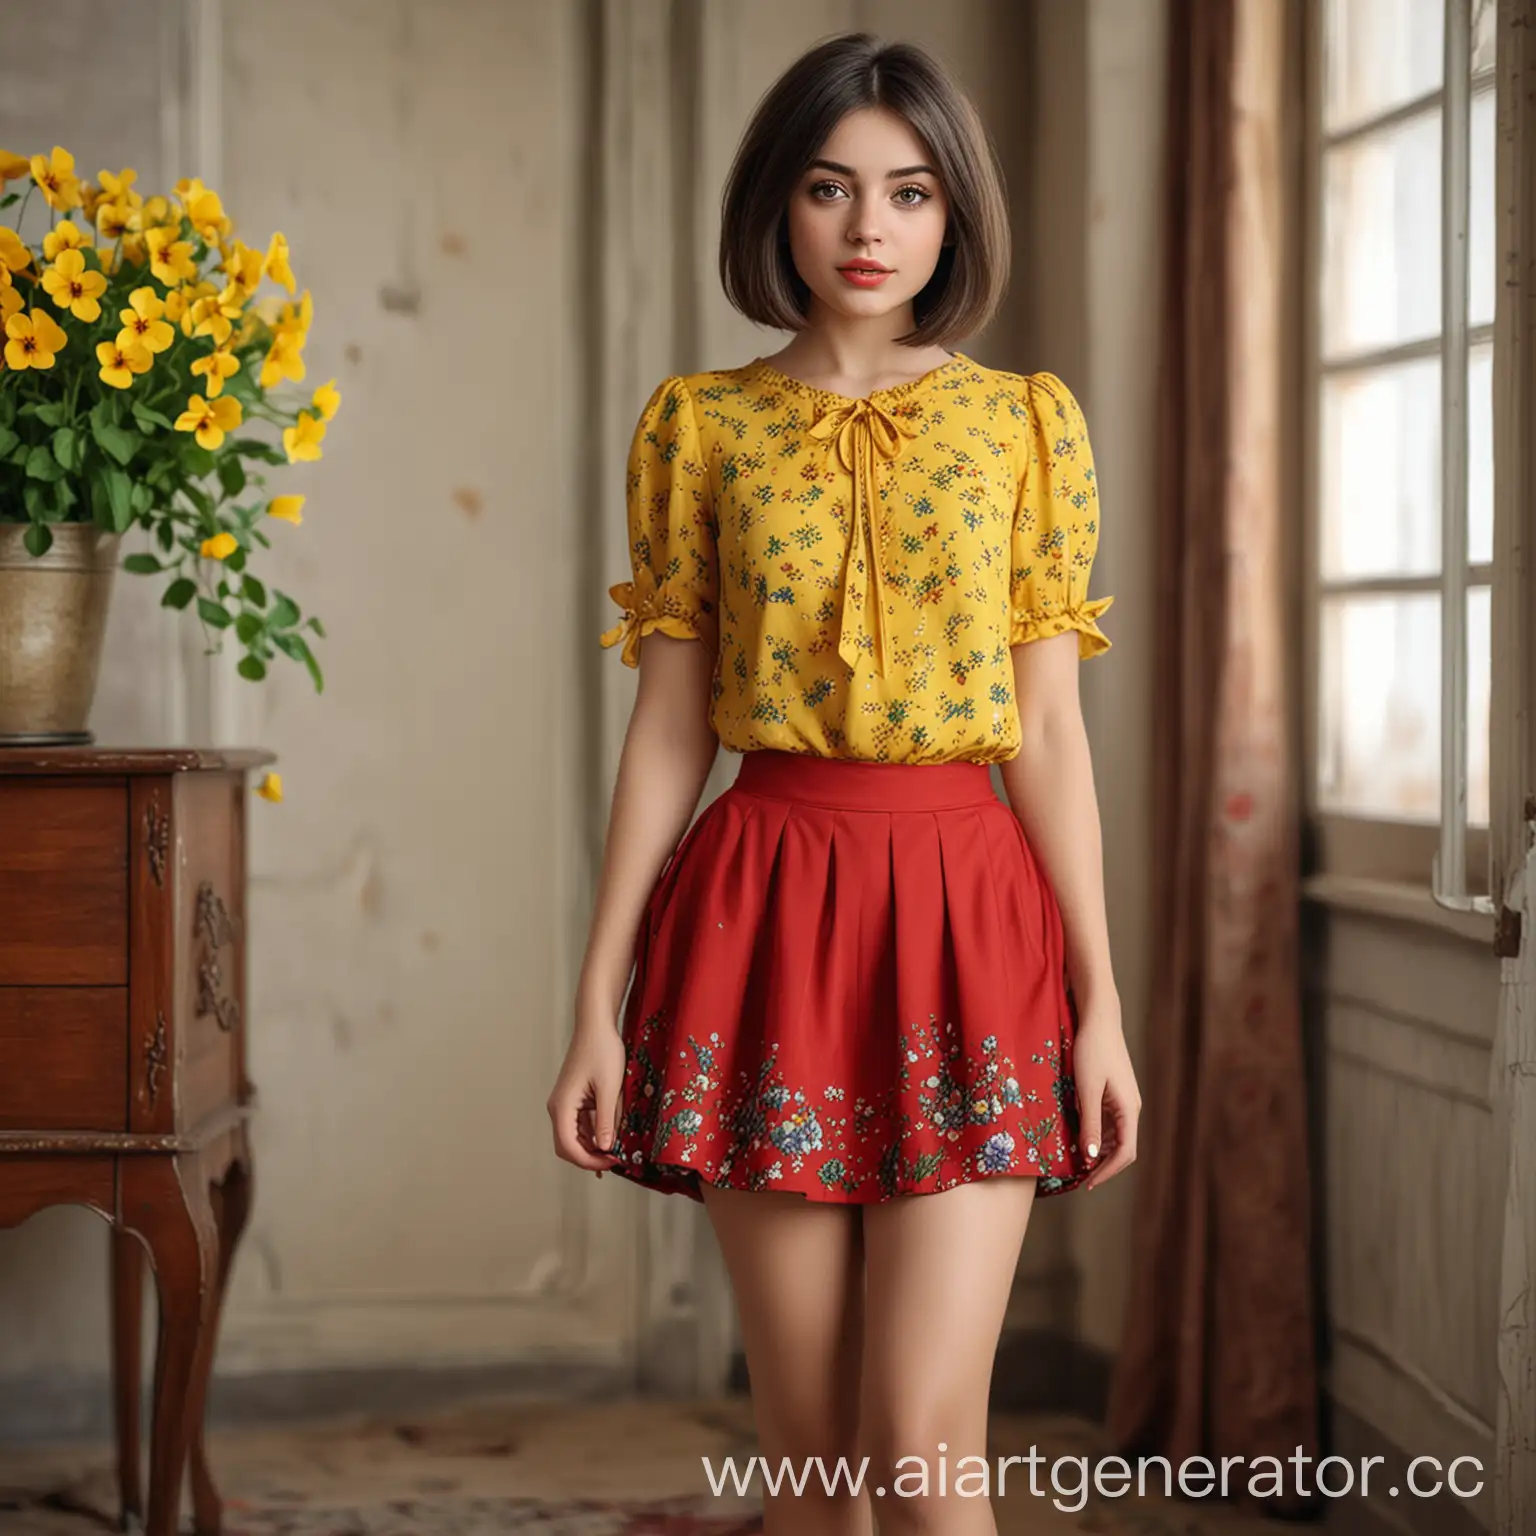 Girl-with-Bob-Cut-and-Pansy-Blouse-in-Room-Setting